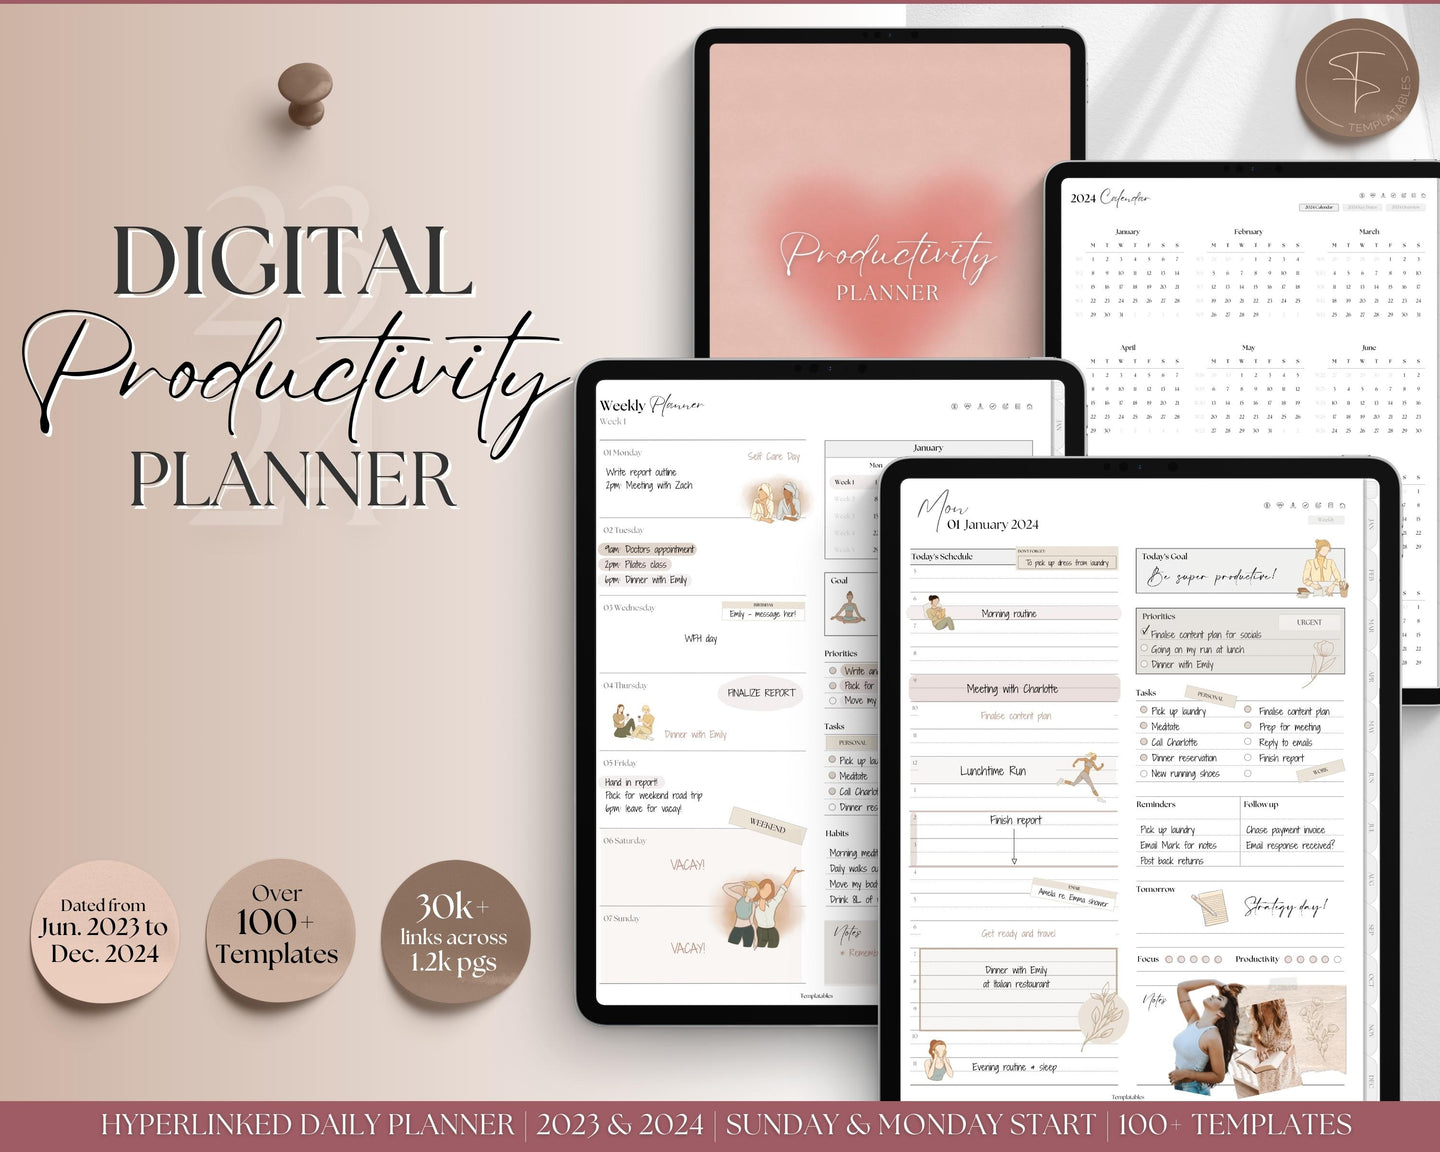 Digital Productivity Planner for 2023 - 2024 | Daily To Do List, ADHD & Goal Planner for GoodNotes & iPad